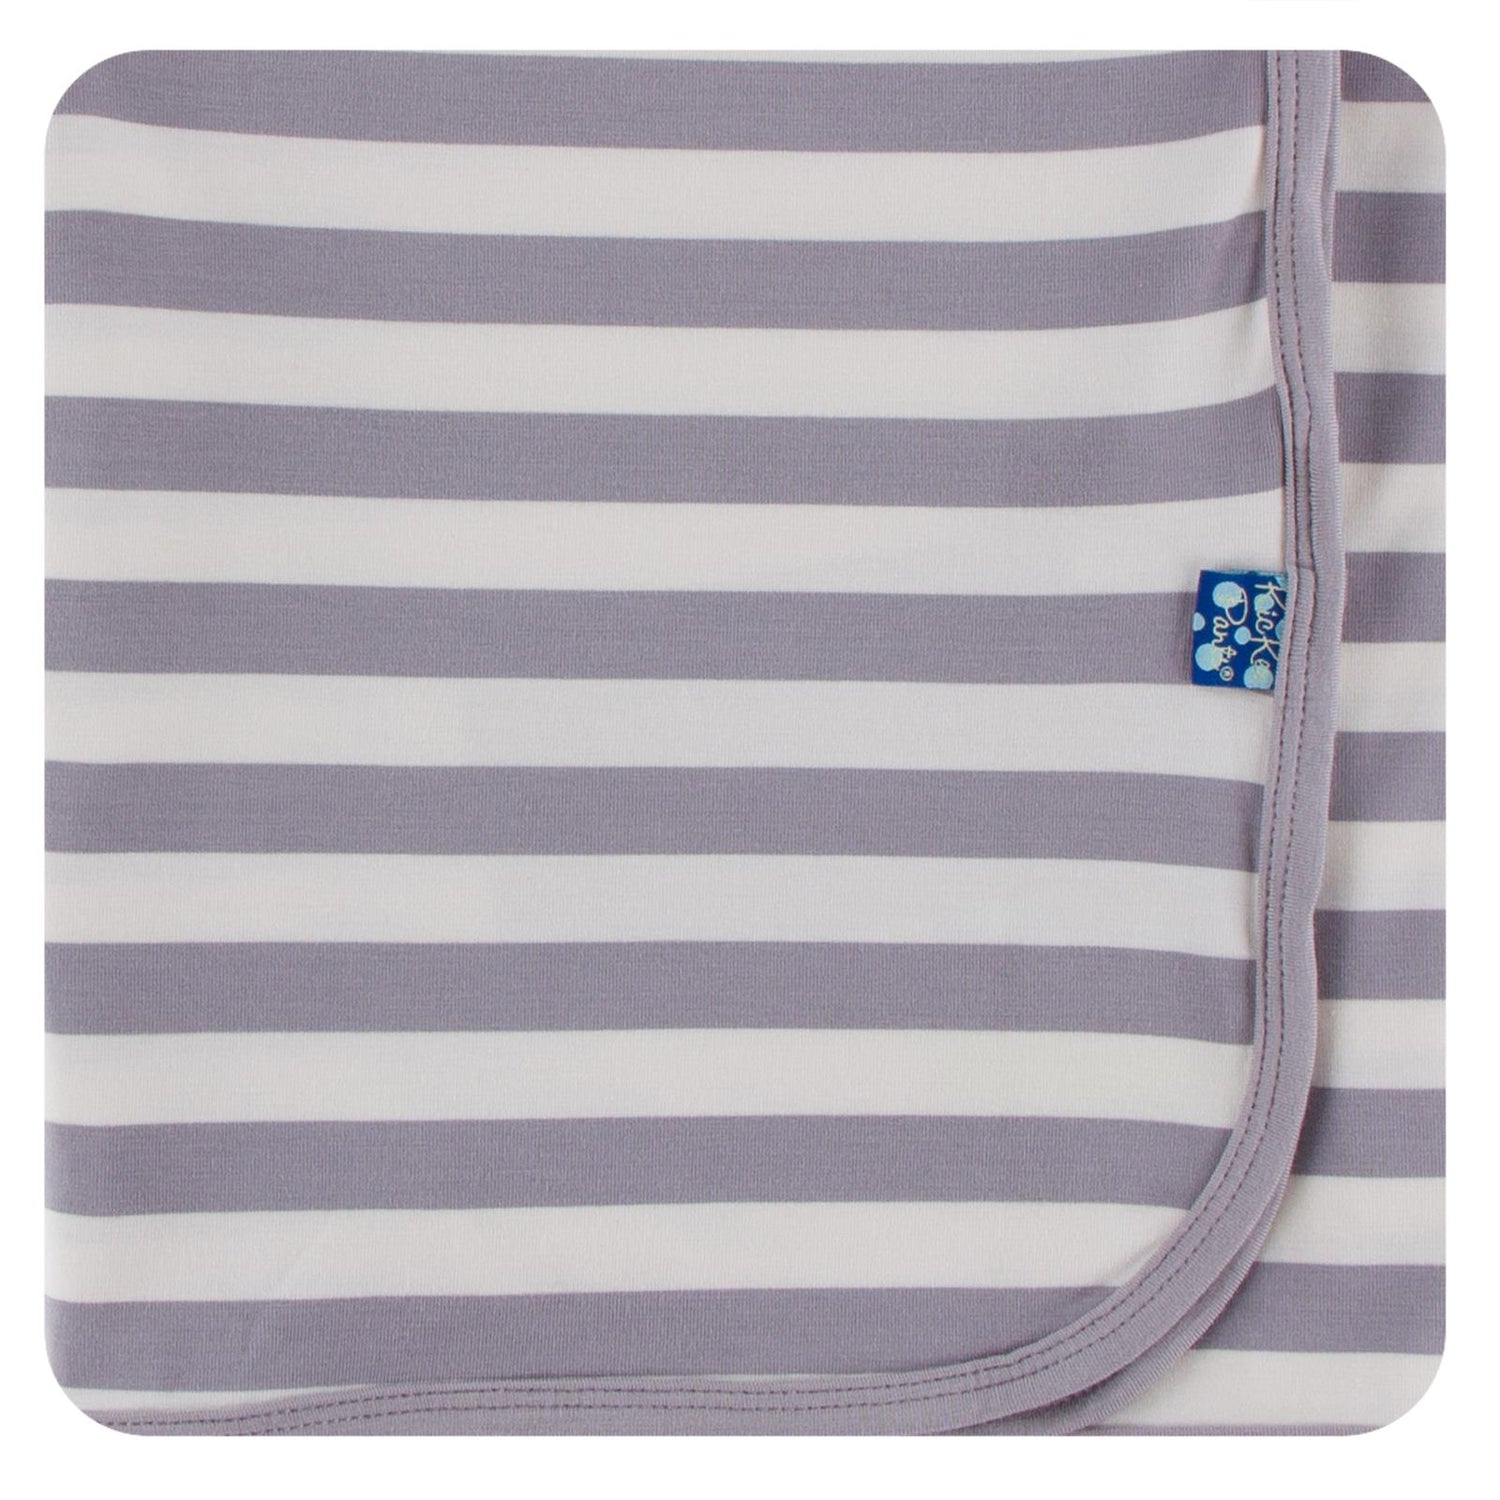 Essentials Swaddling Blanket in Feather Contrast Stripe